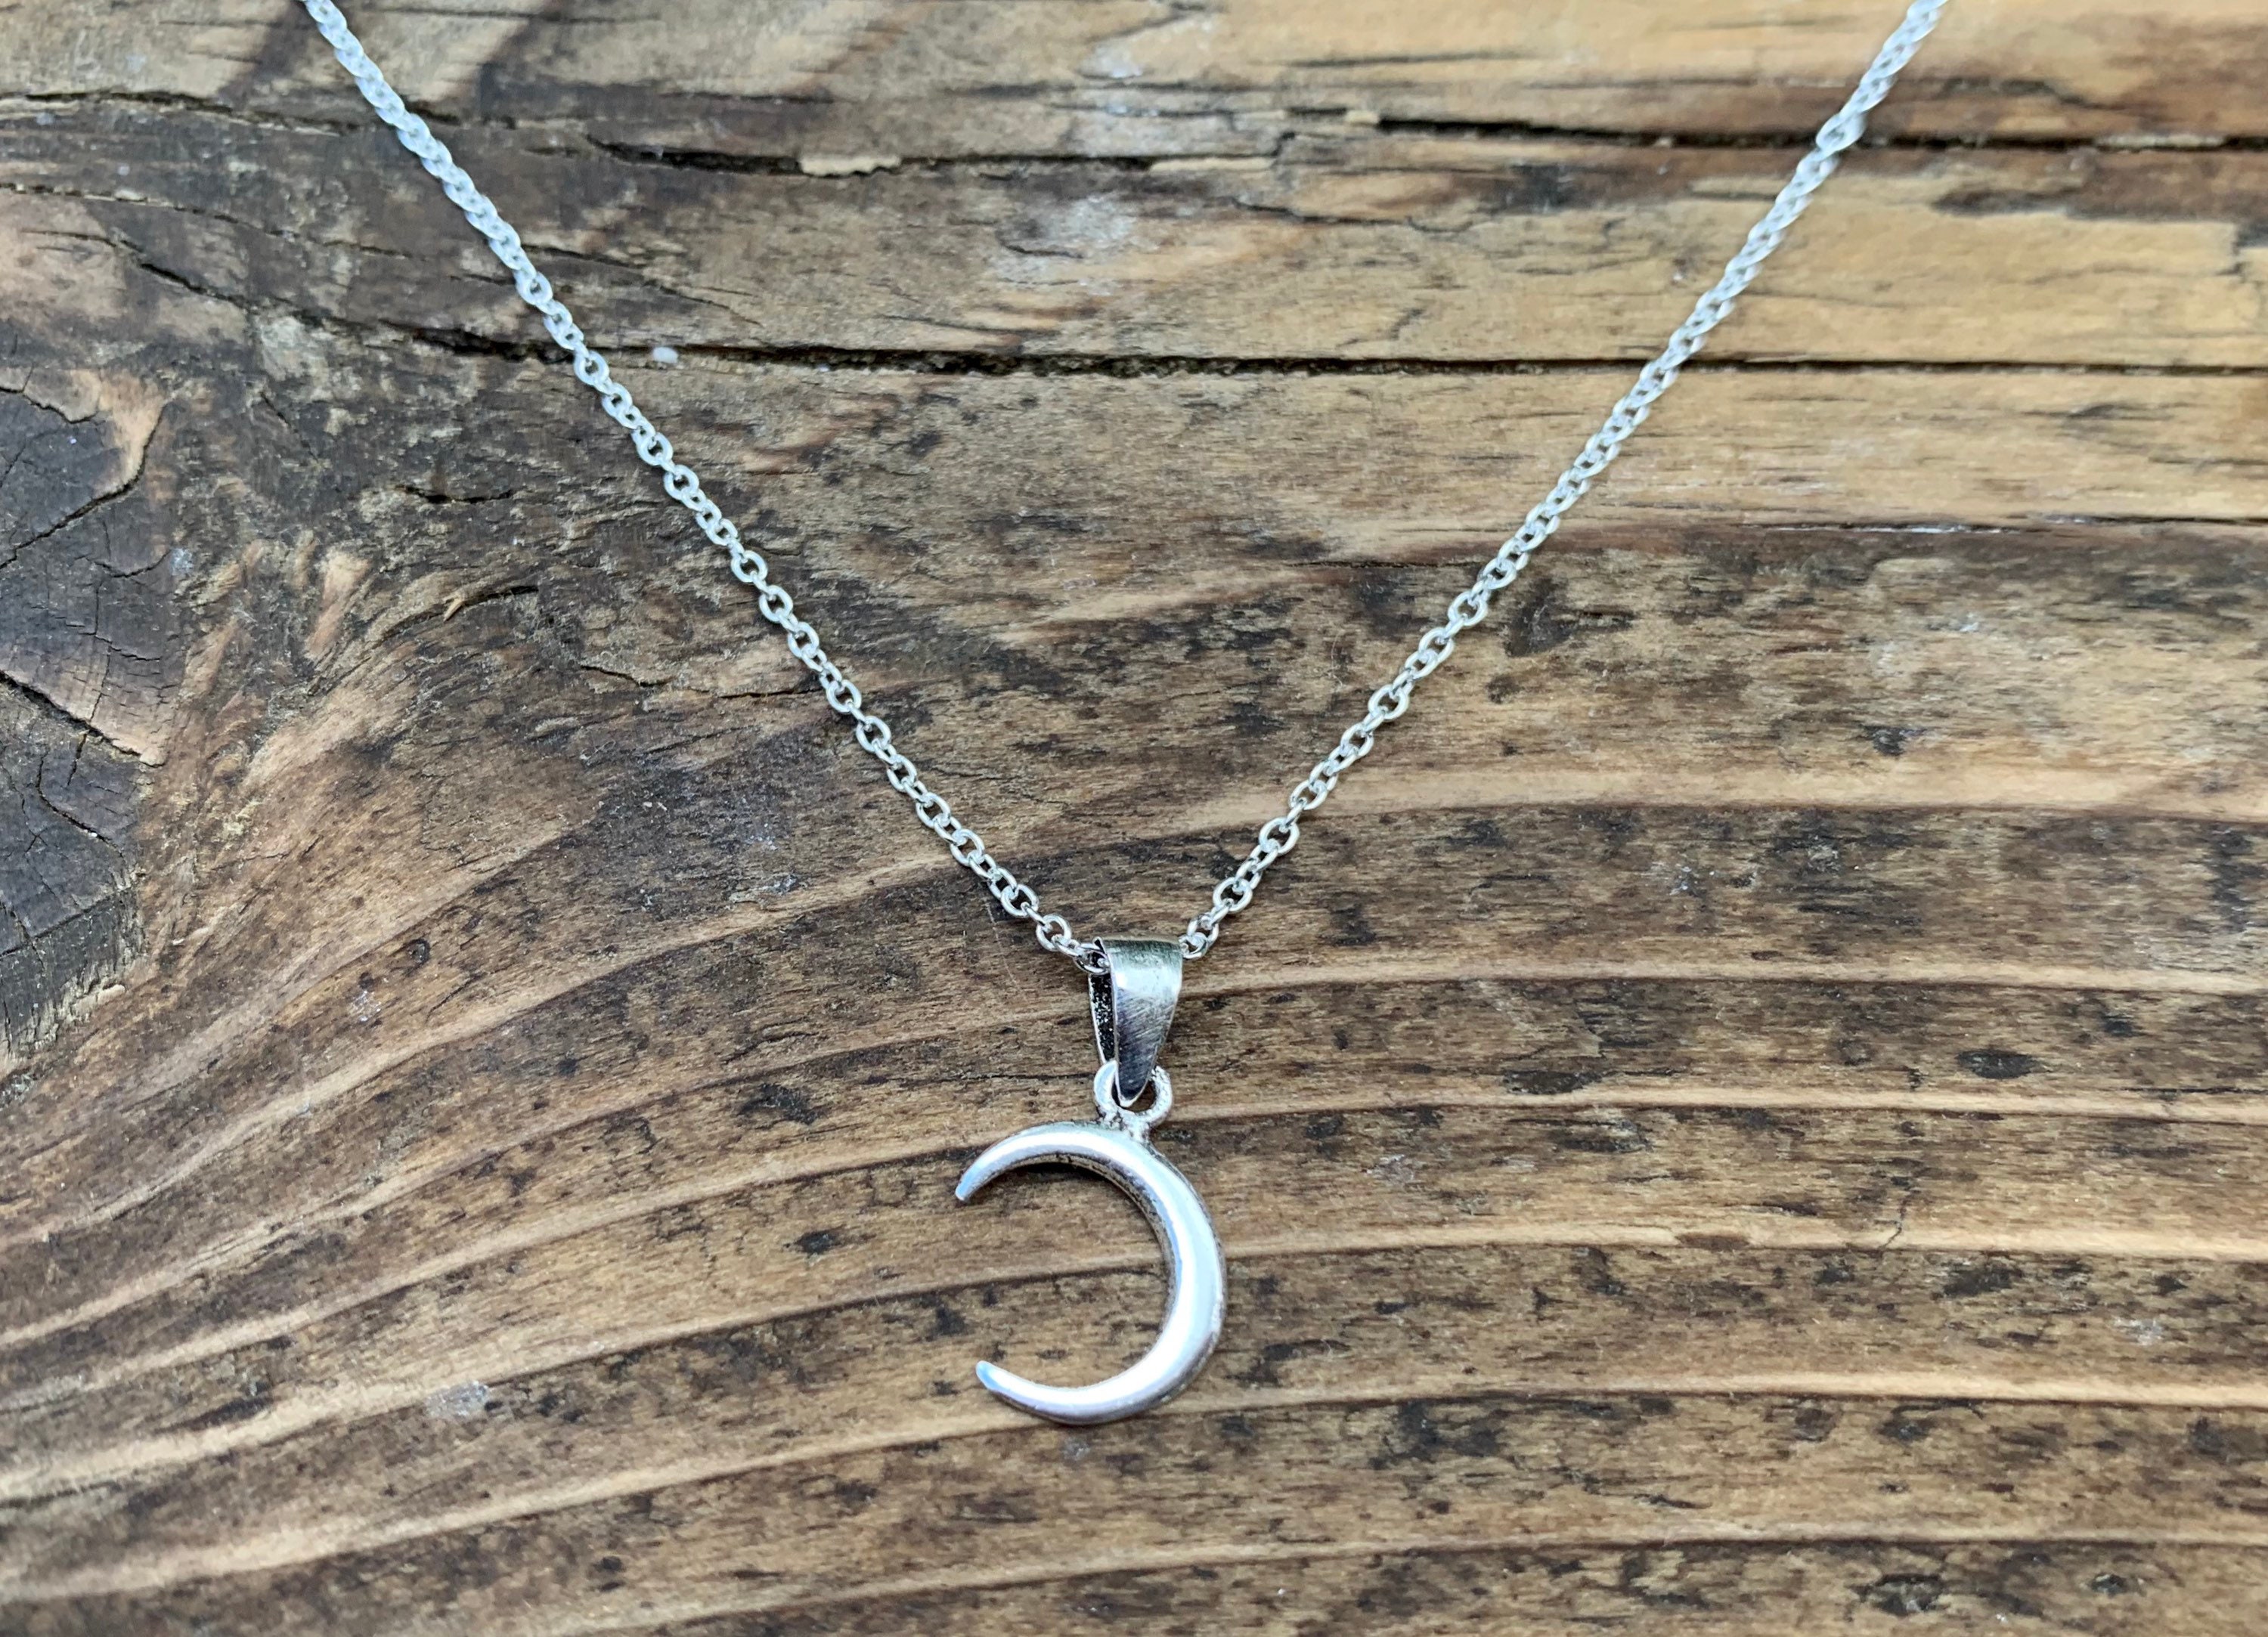 Crescent Moon Necklace for Men, Men's Necklace Silver Half Moon Pendant,  Silver Chain, Birthday Gift for Him, Waterproof Lunar Moon Necklace - Etsy